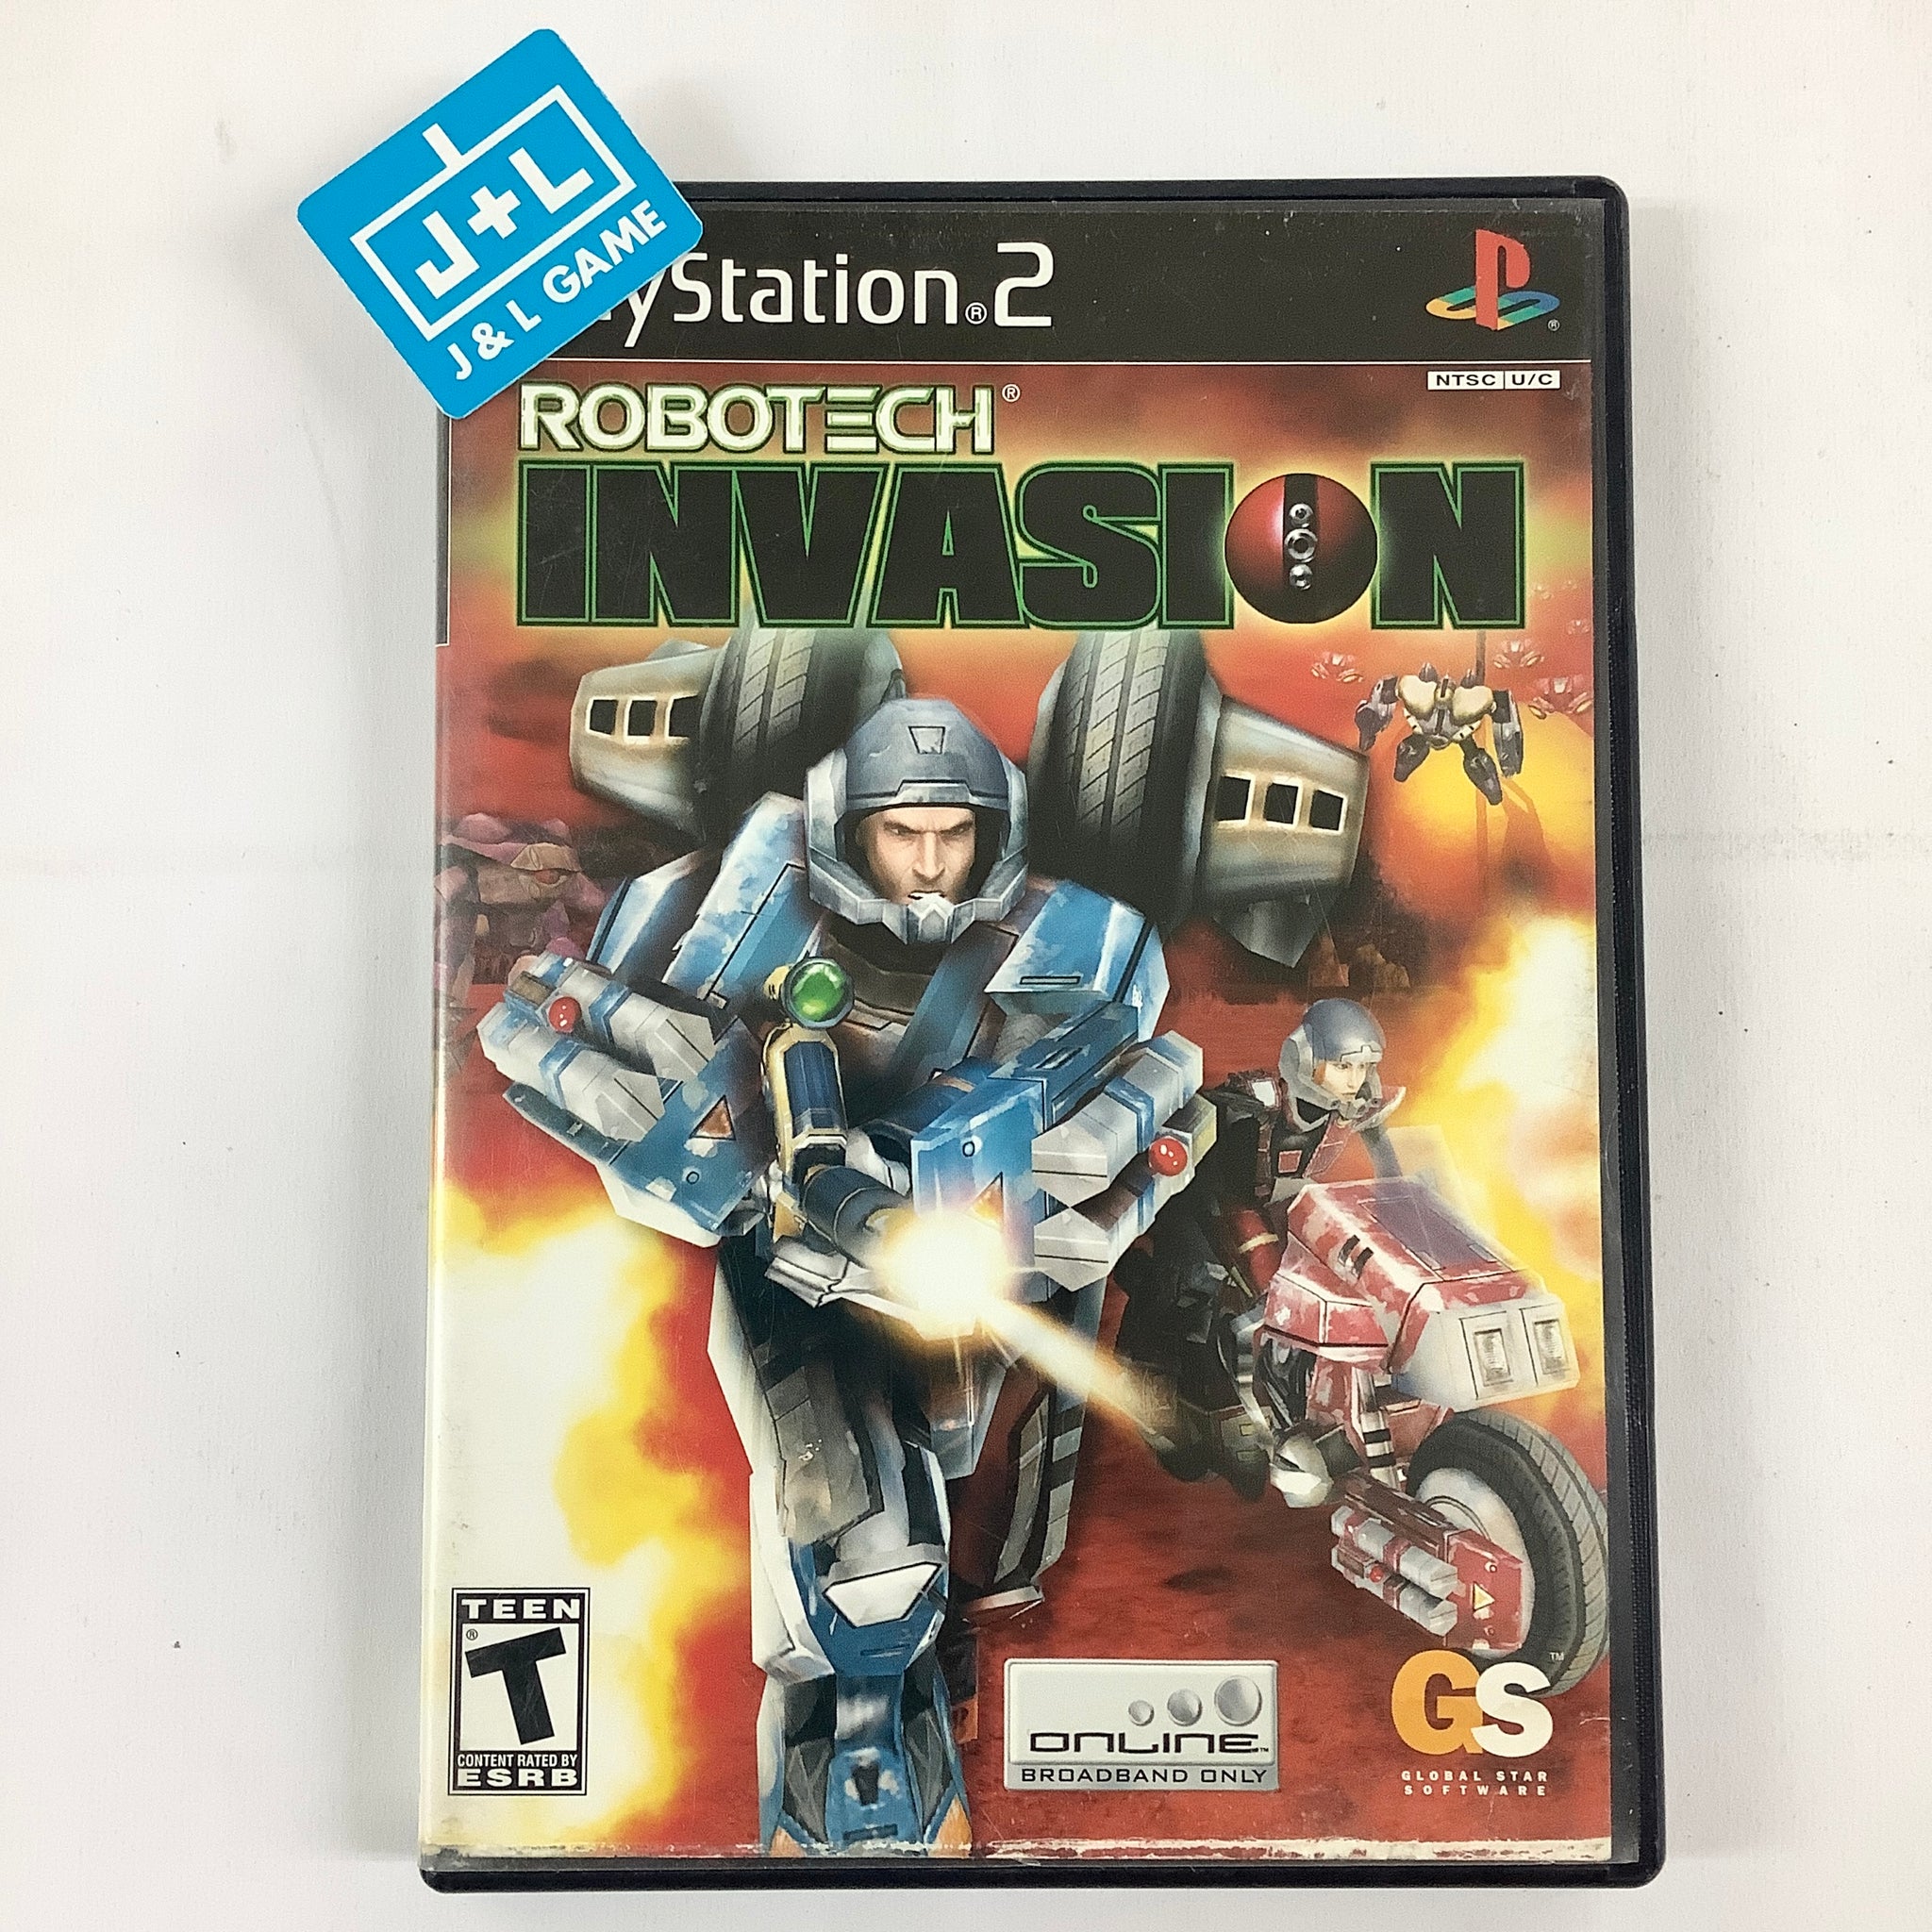 Robotech: Invasion - PlayStation 2